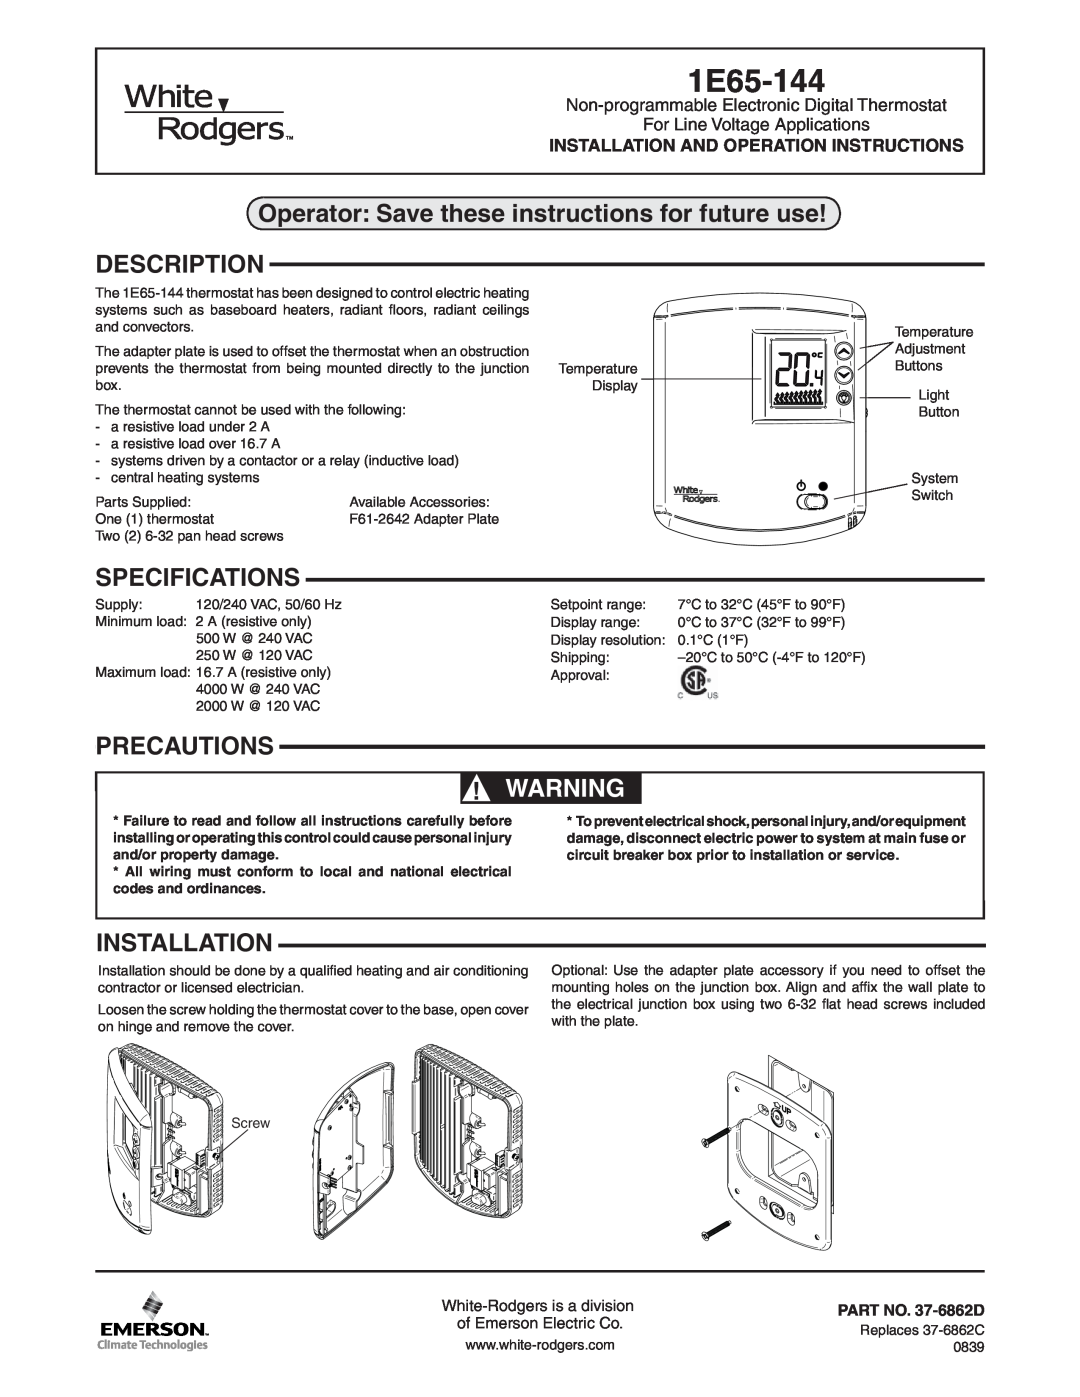 White Rodgers 1E65-144 specifications Operator Save these instructions for future use, Description, Specifications 